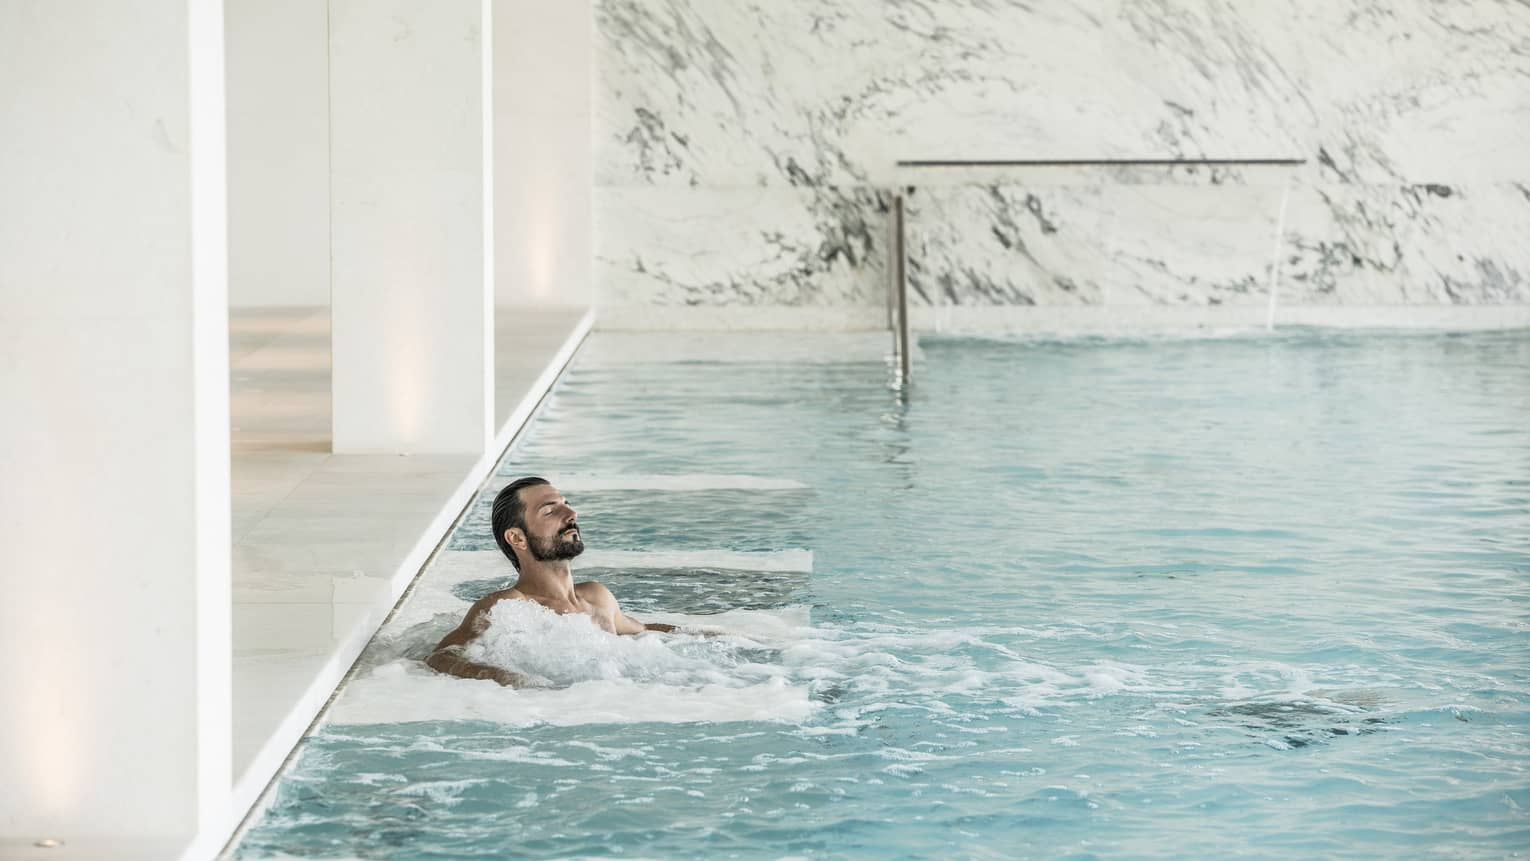 Man with beard relaxes in spa waters, surrounded by white marble